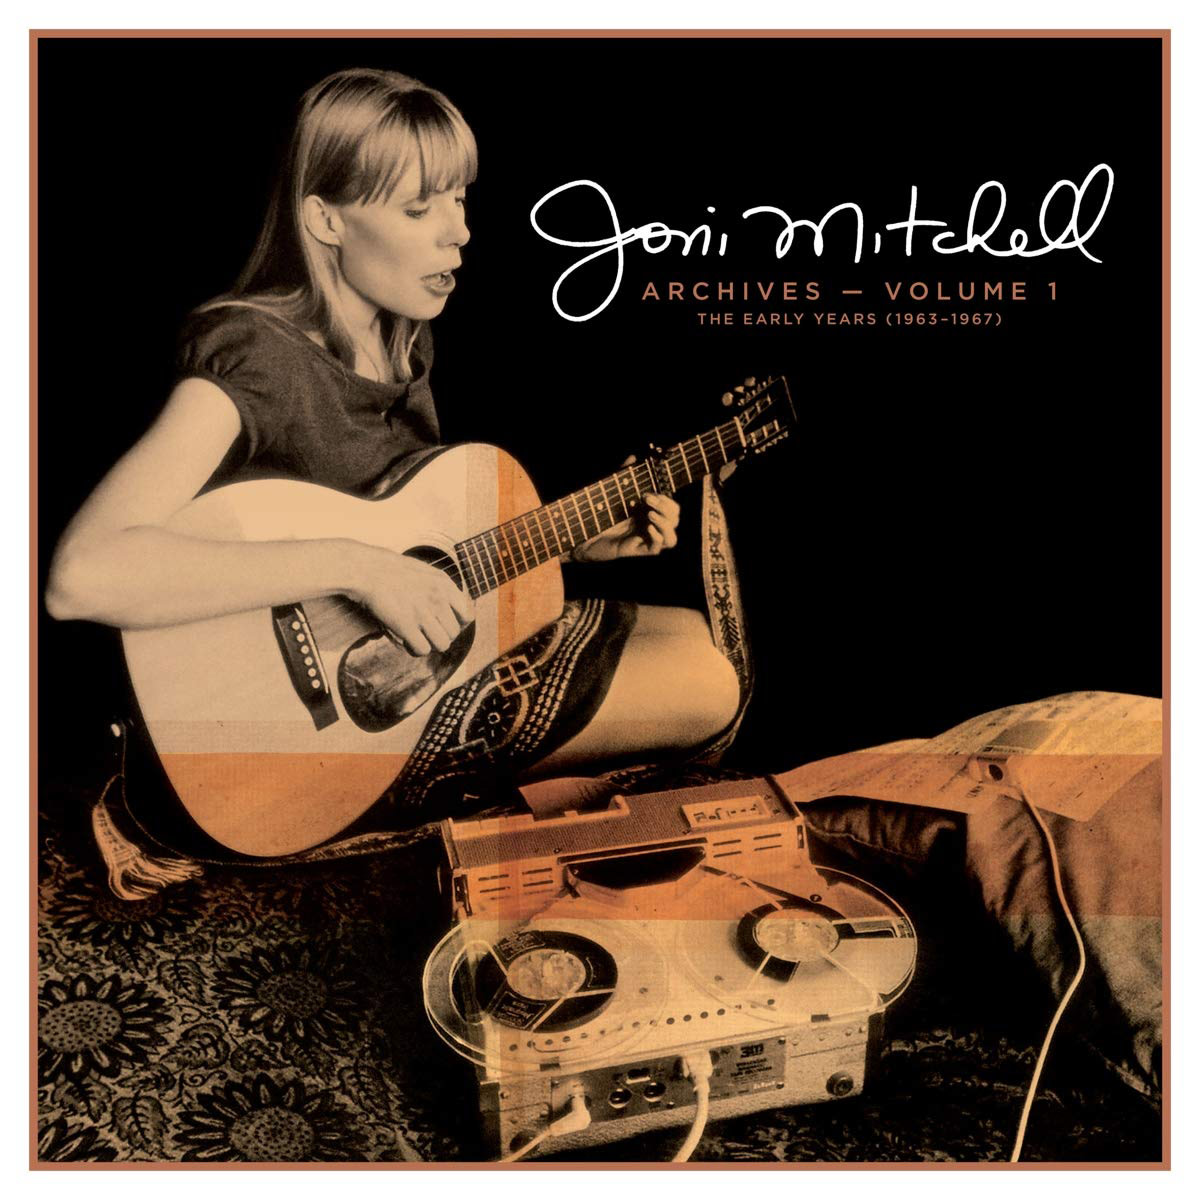 Joni Mitchell Archives Vol. 1The Early Years